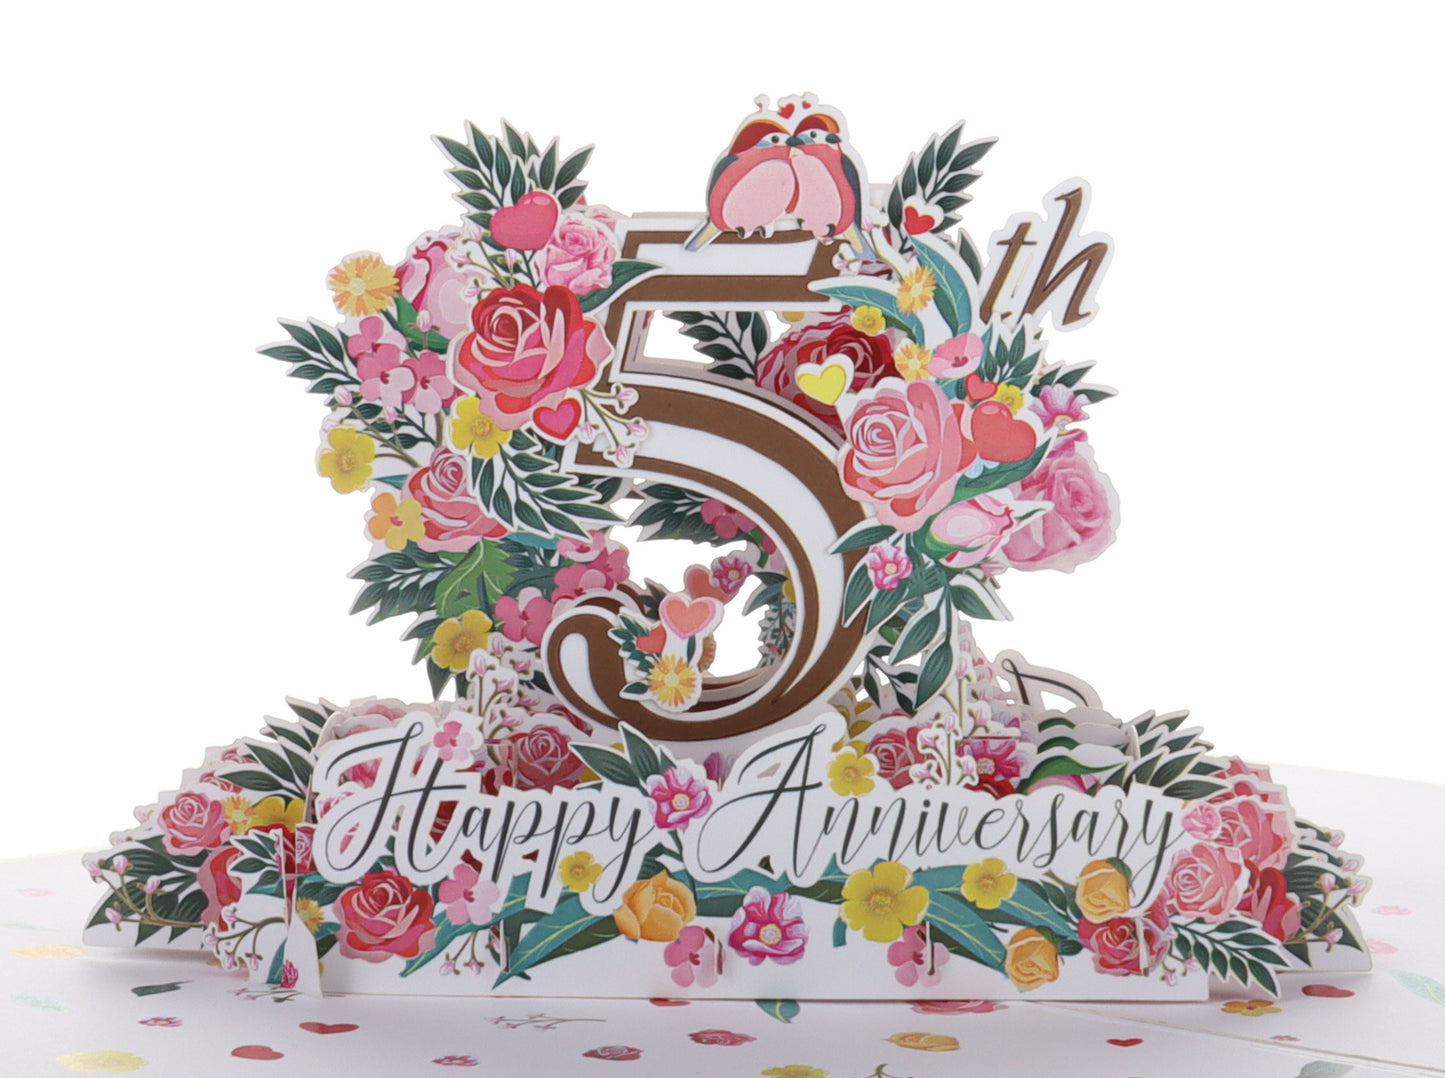 5th Milestone Anniversary 3D Pop Up Greeting Card - 5th Anniversary Being Together - 5th Wedding Ann - iGifts And Cards